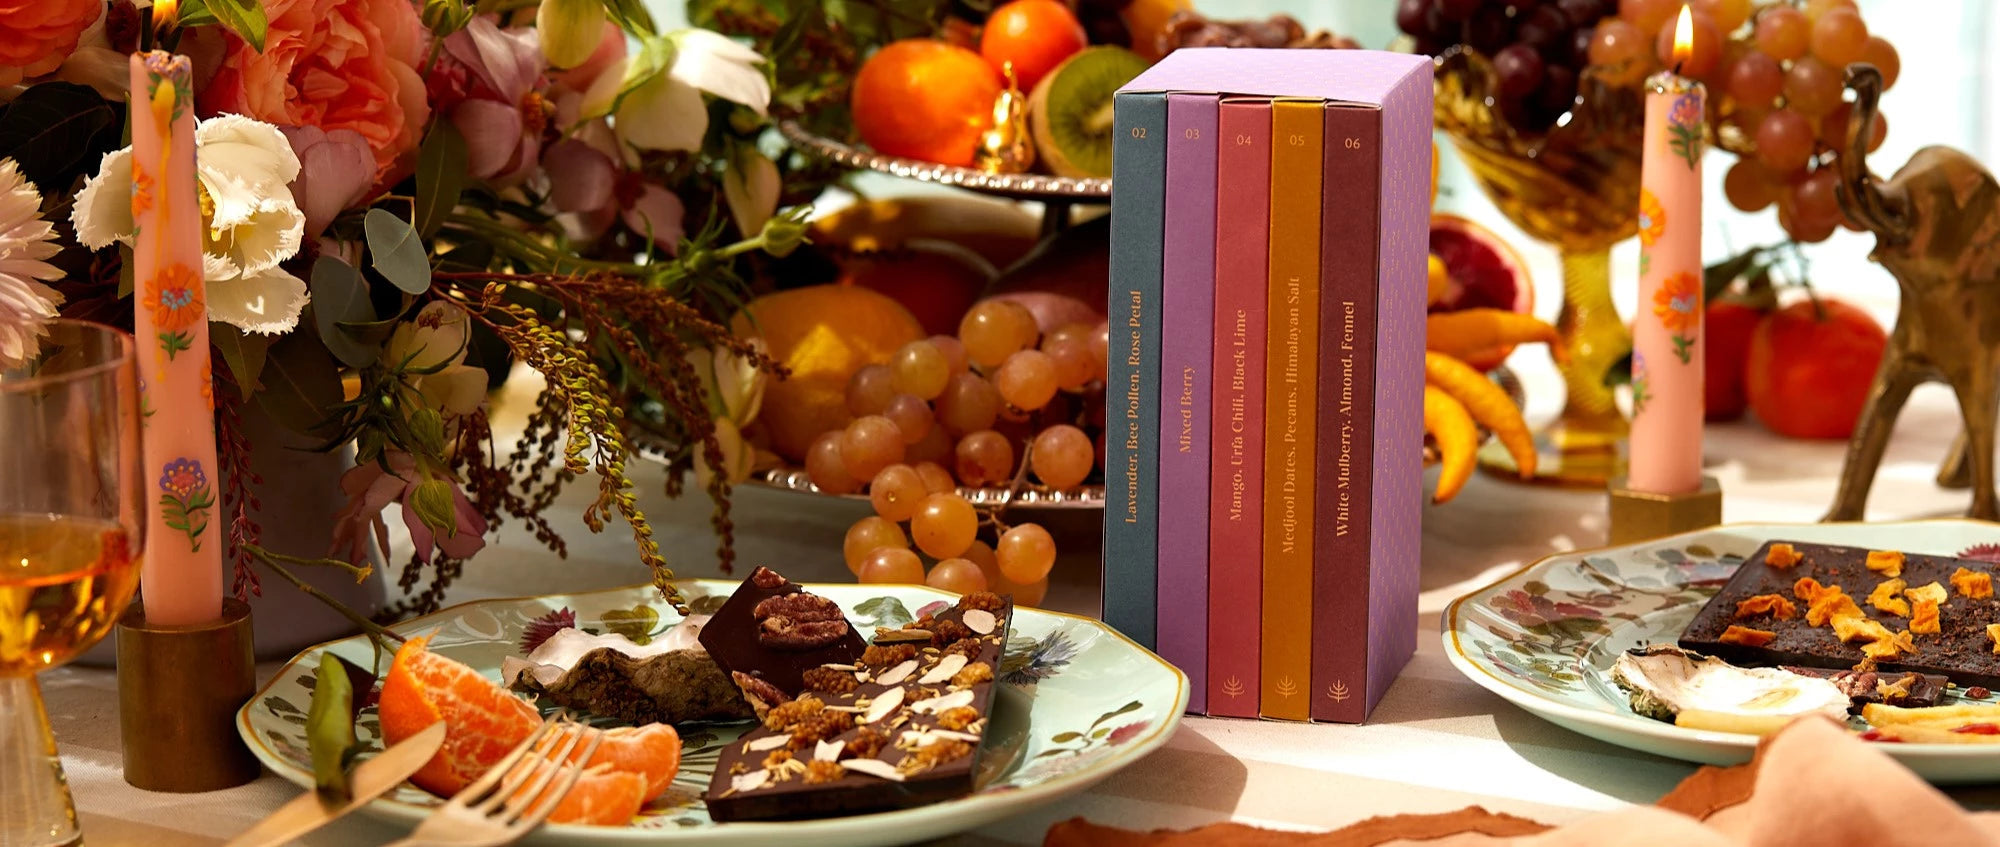 A gift set of chocolate bars sits on the table of a dinner party.